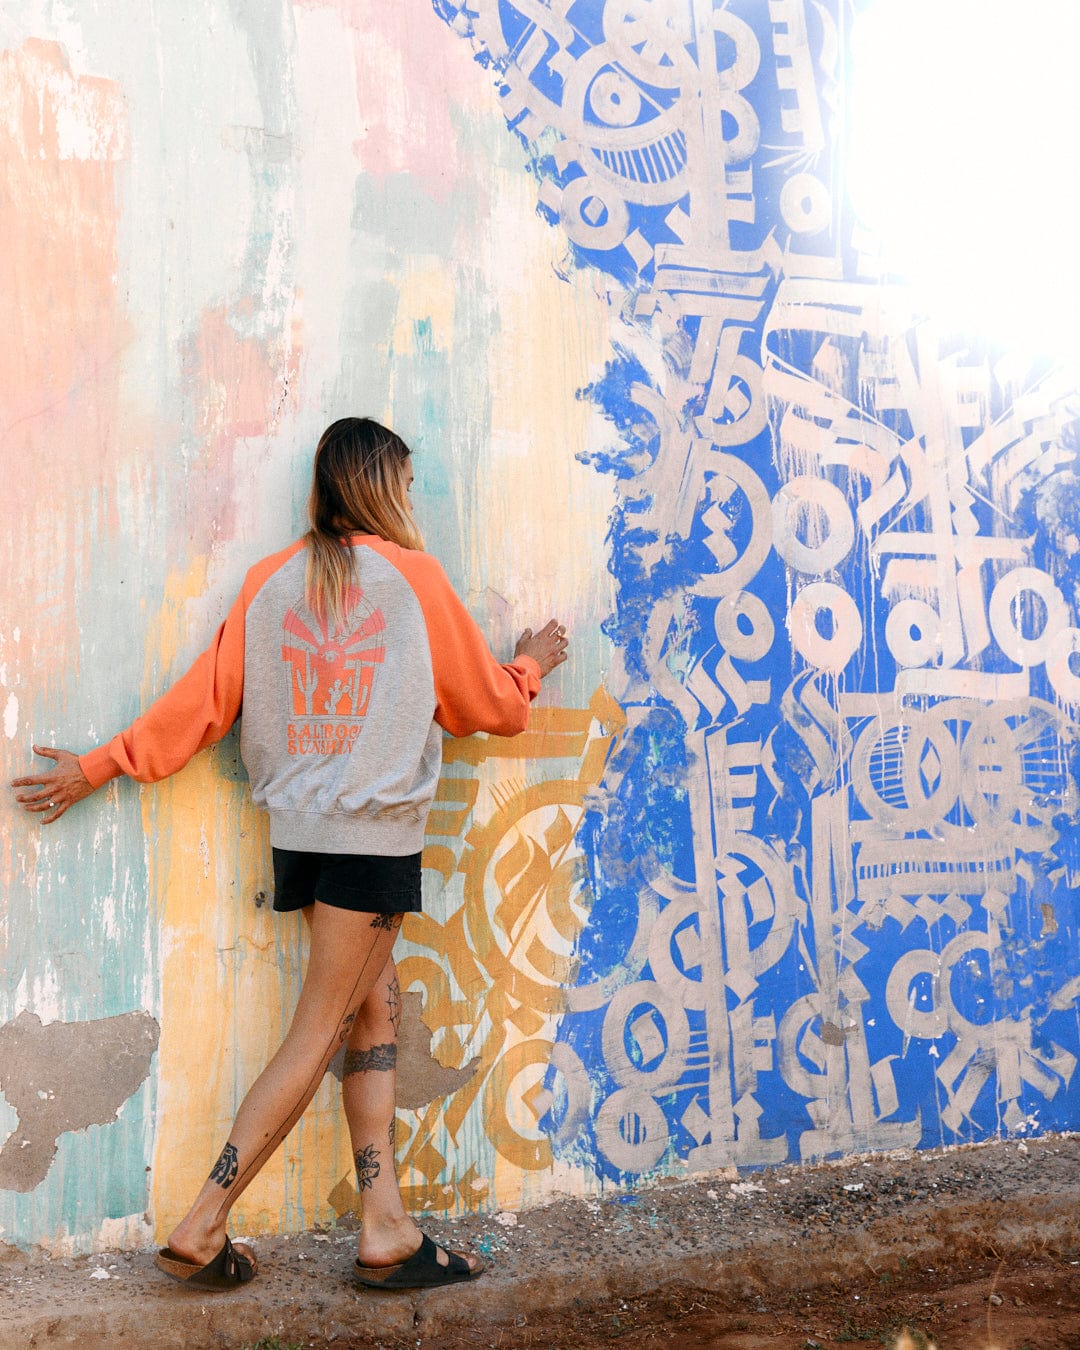 A woman in a Saltrock Sunshine - Womens Raglan Sweat - Grey Marl hoodie with raglan sleeves and black shorts touches a colorful mural wall featuring vibrant abstract designs.